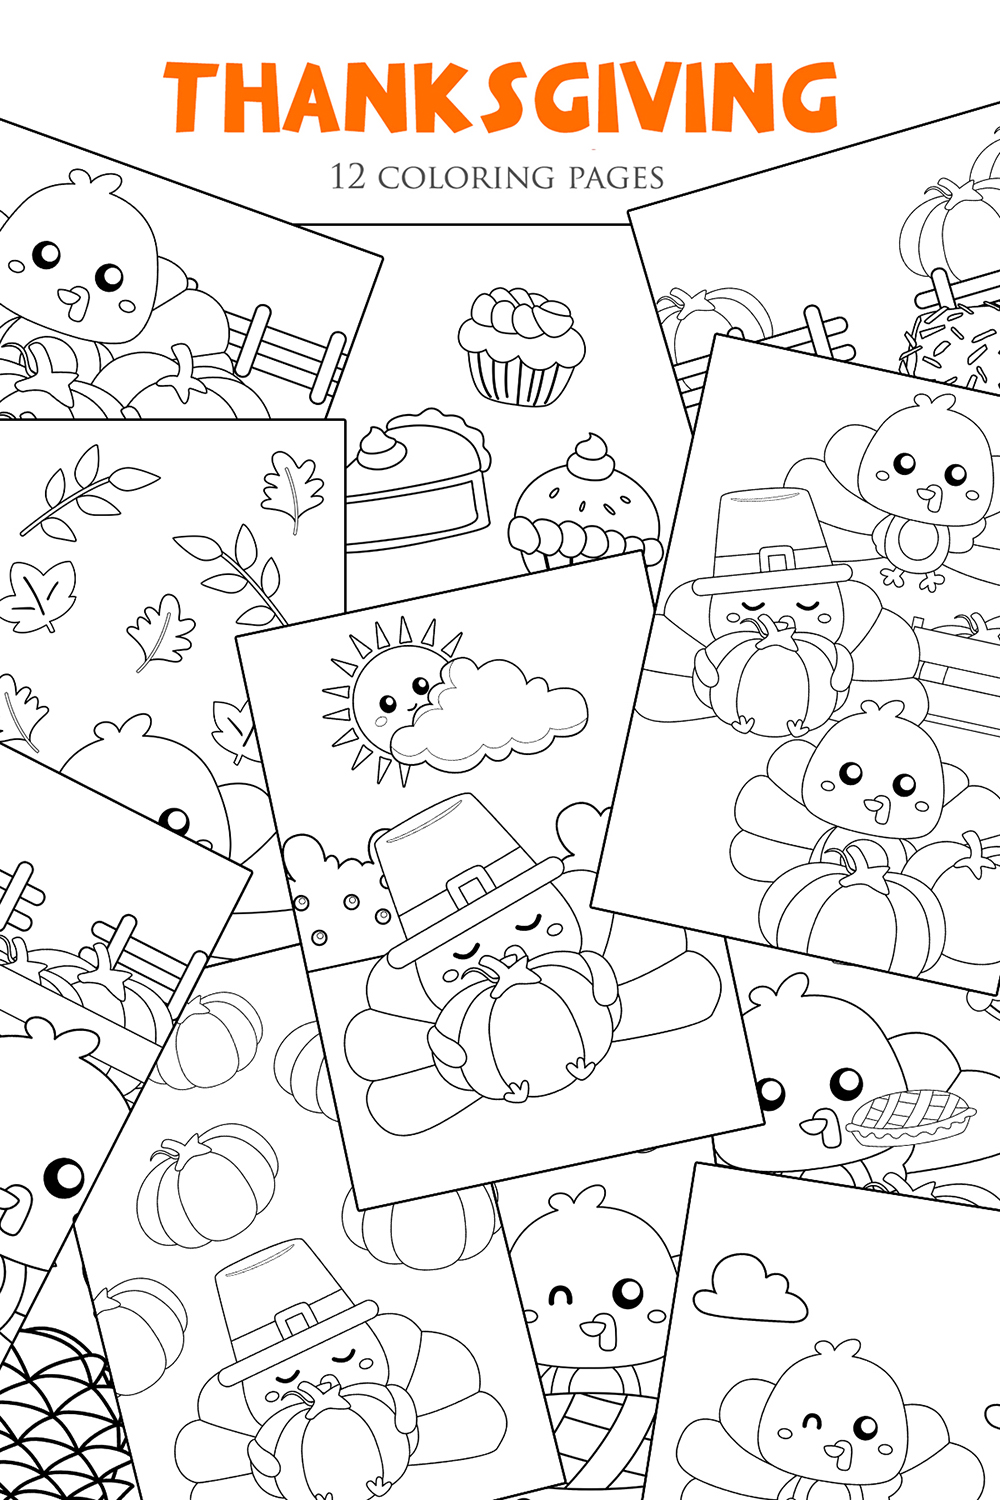 Thanksgiving Turkey Bird Garden Party Decoration Animal and Food Pie Season Holiday Background Cartoon Coloring Pages for Kids and Adult pinterest preview image.